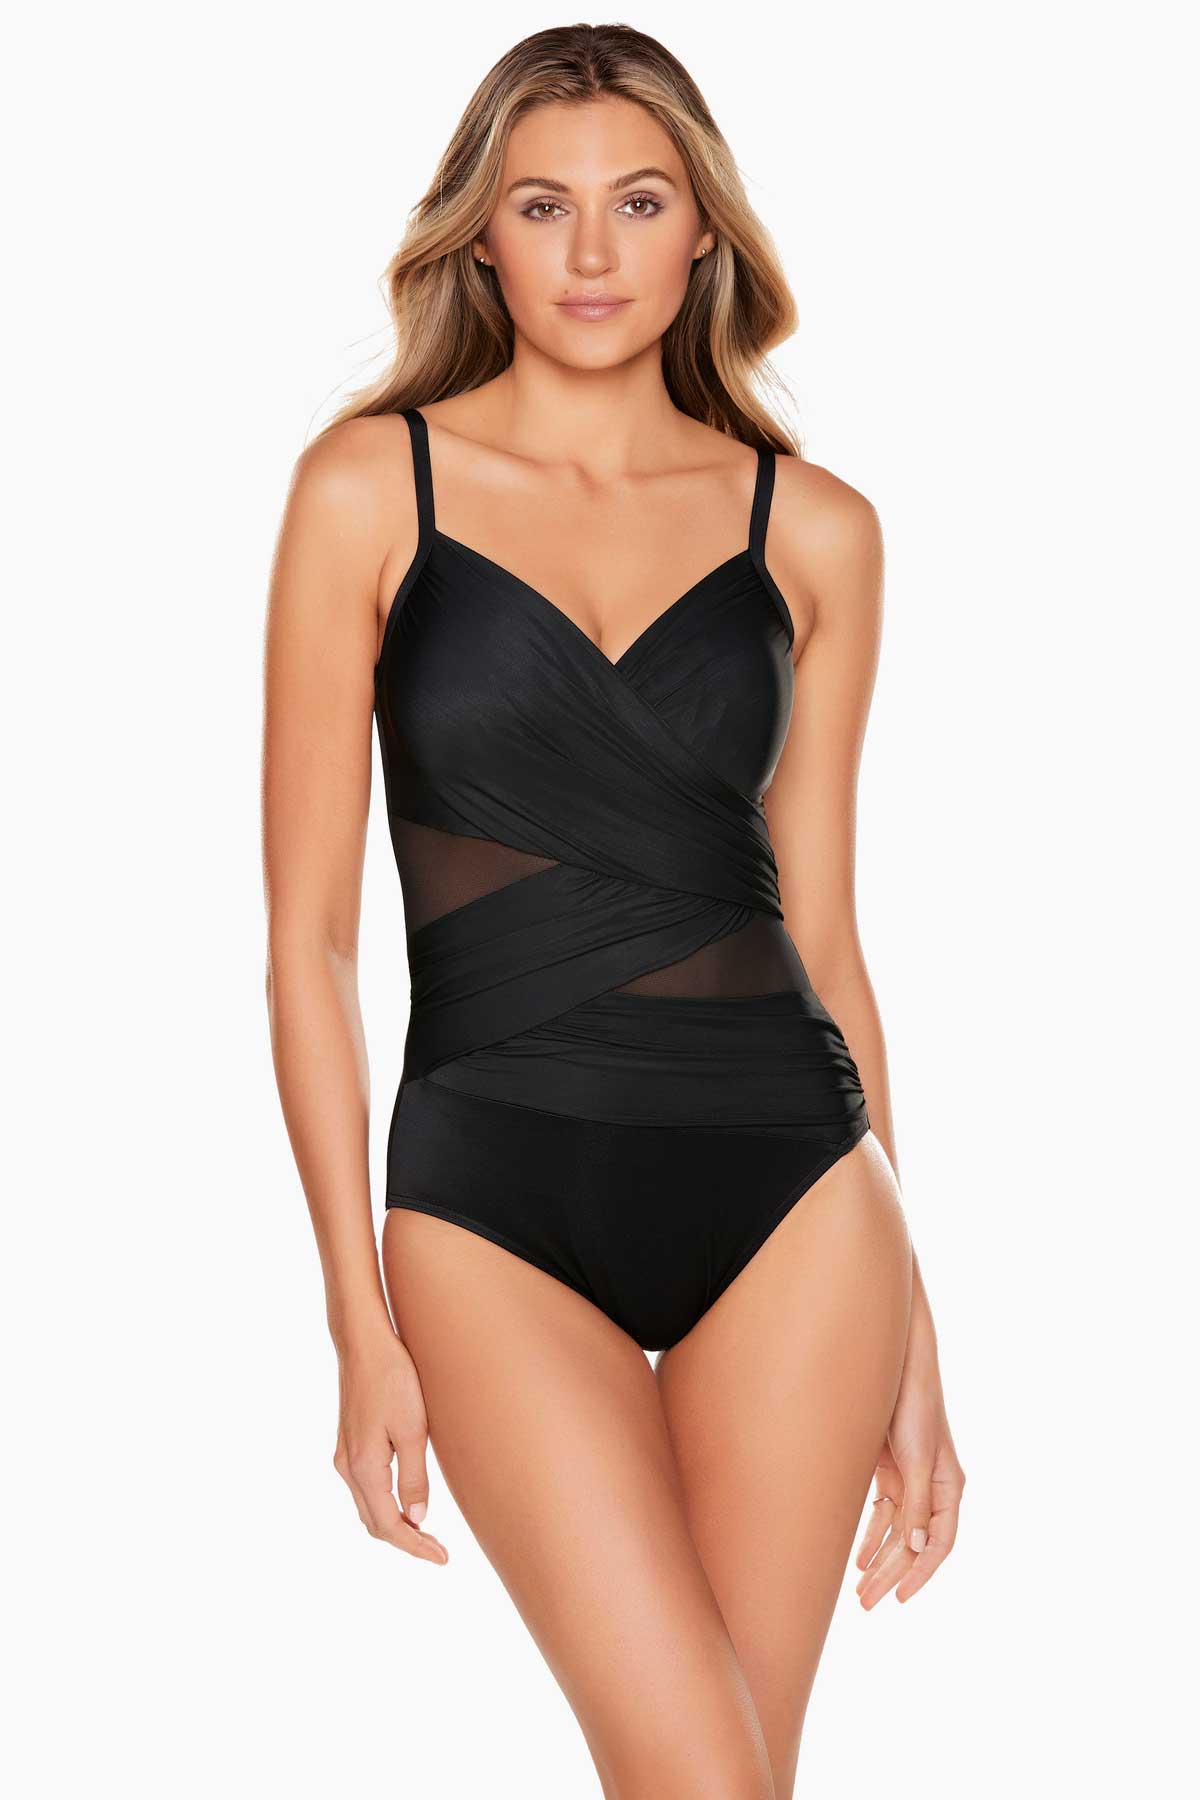 Miraclesuit Women's One Piece Swimsuits